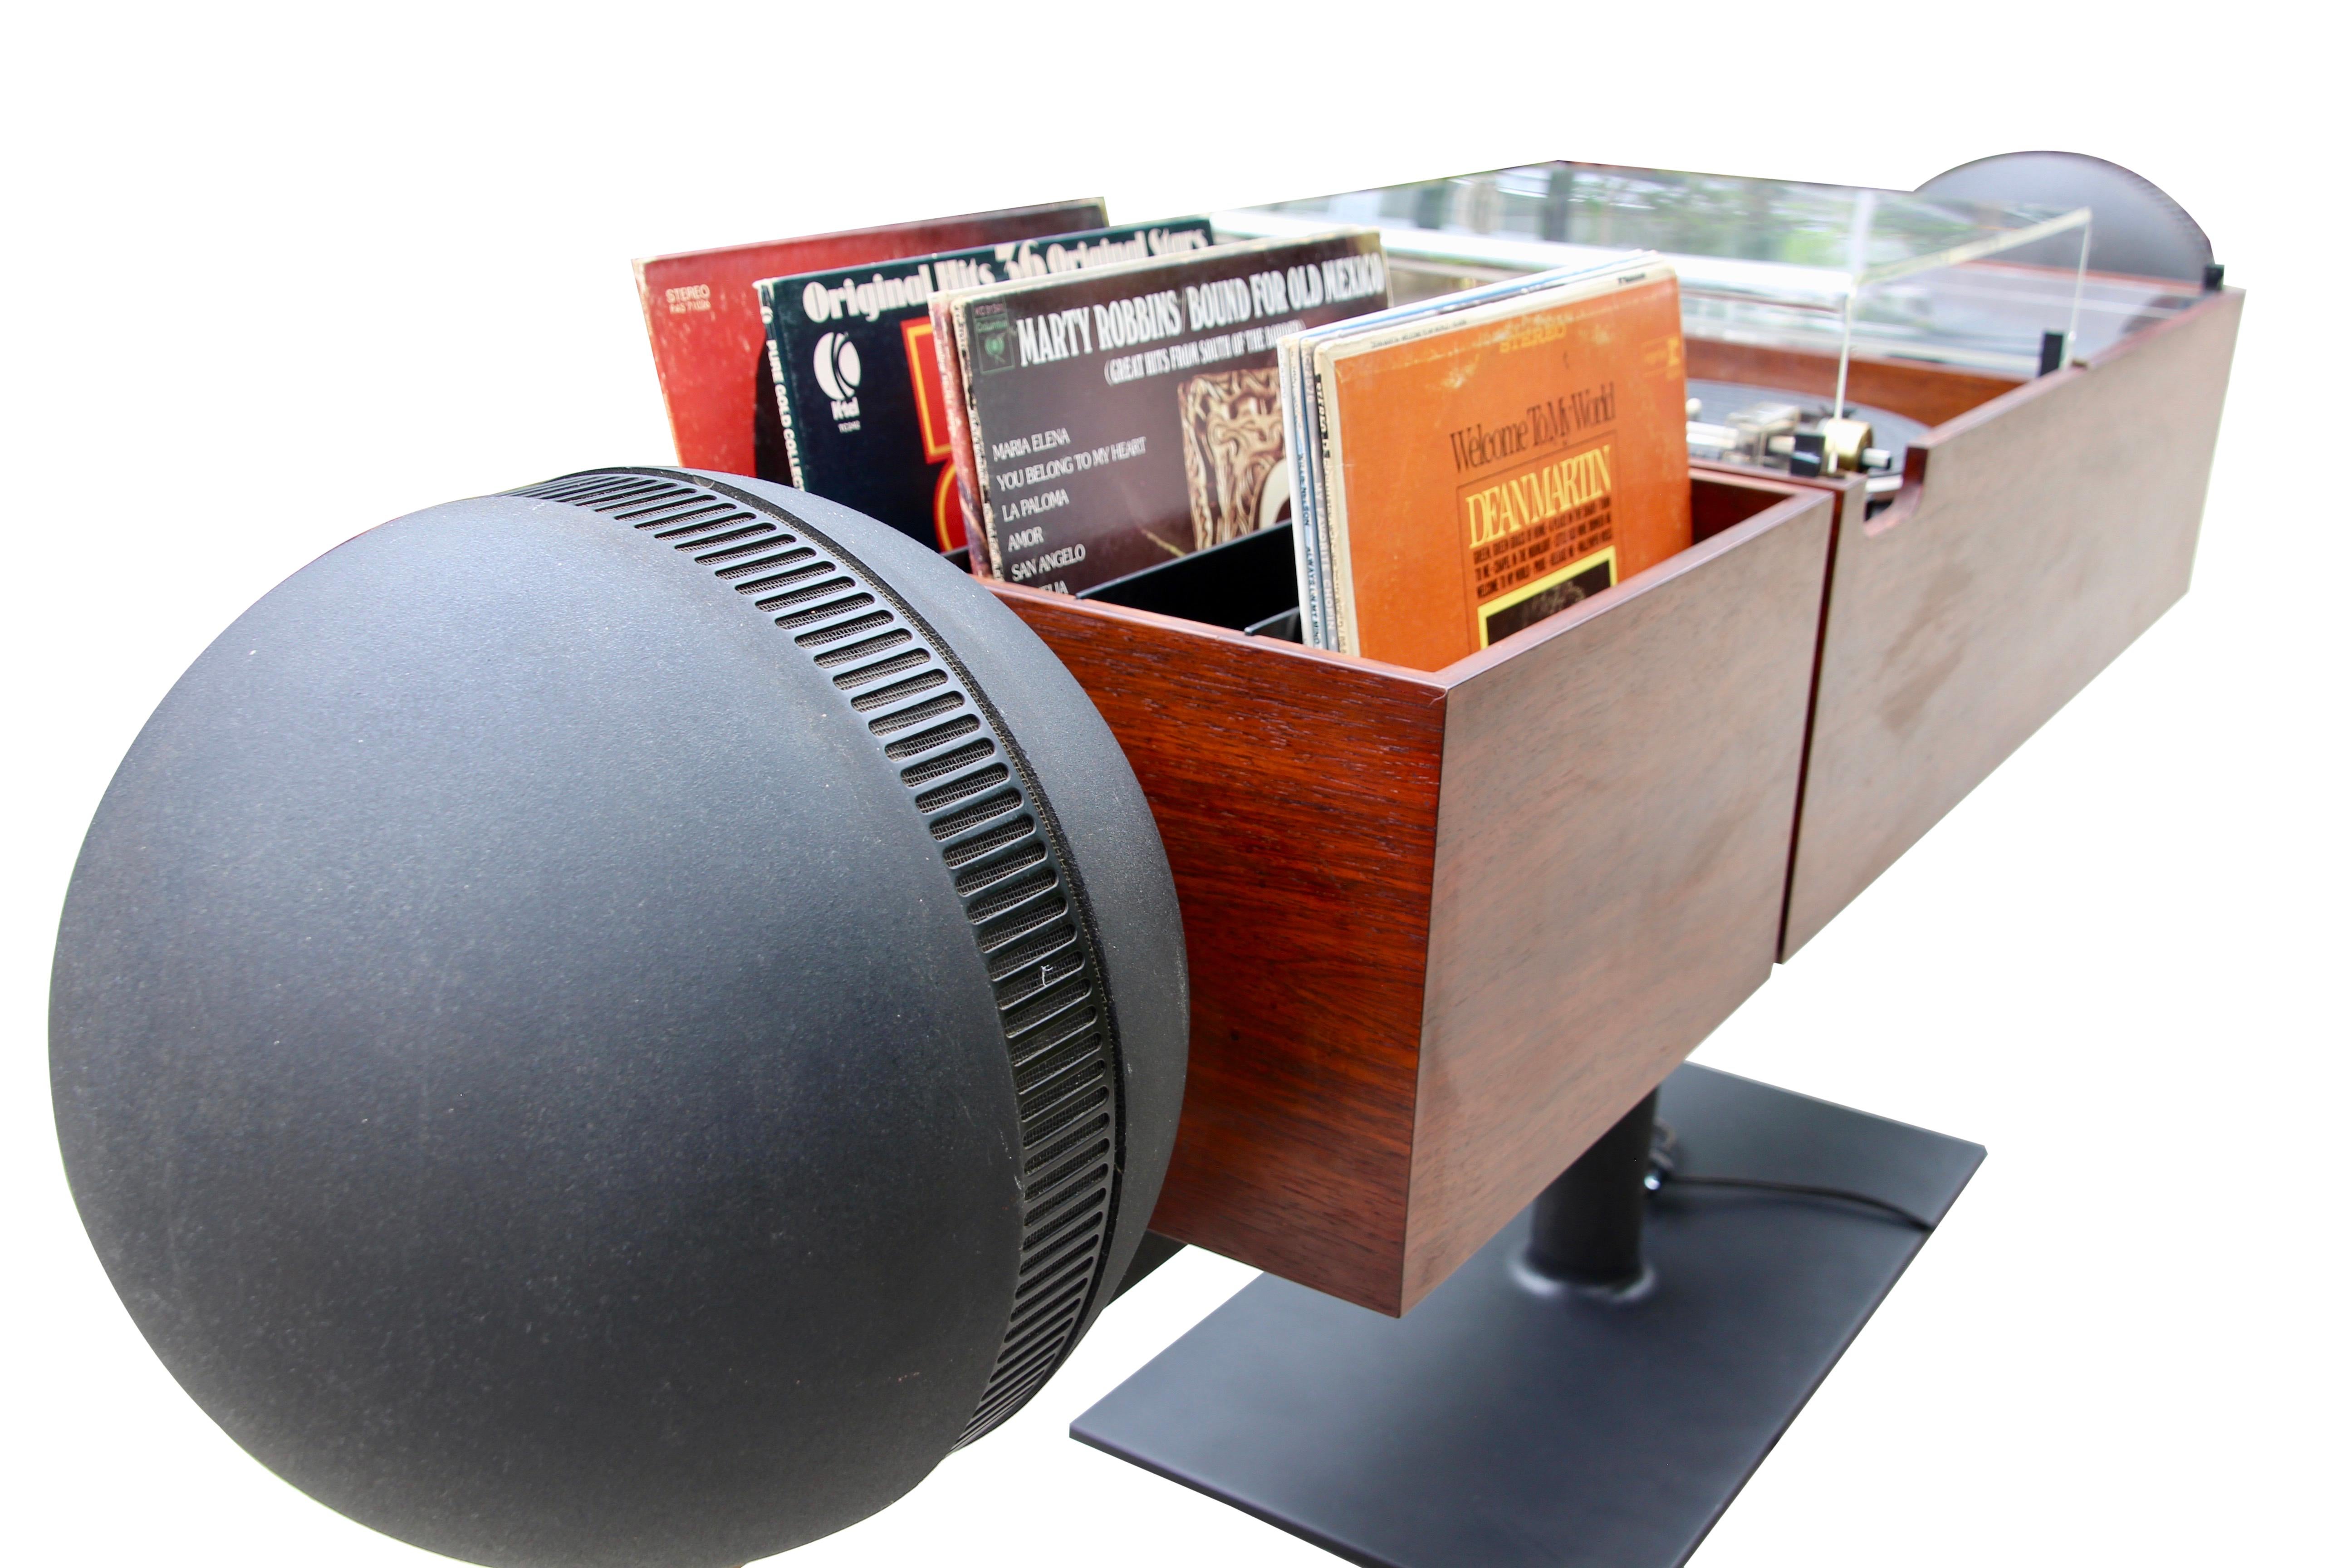 Aluminum Clairtone Project G2 Series T11 Console Stereo System & Garrard Turntable For Sale